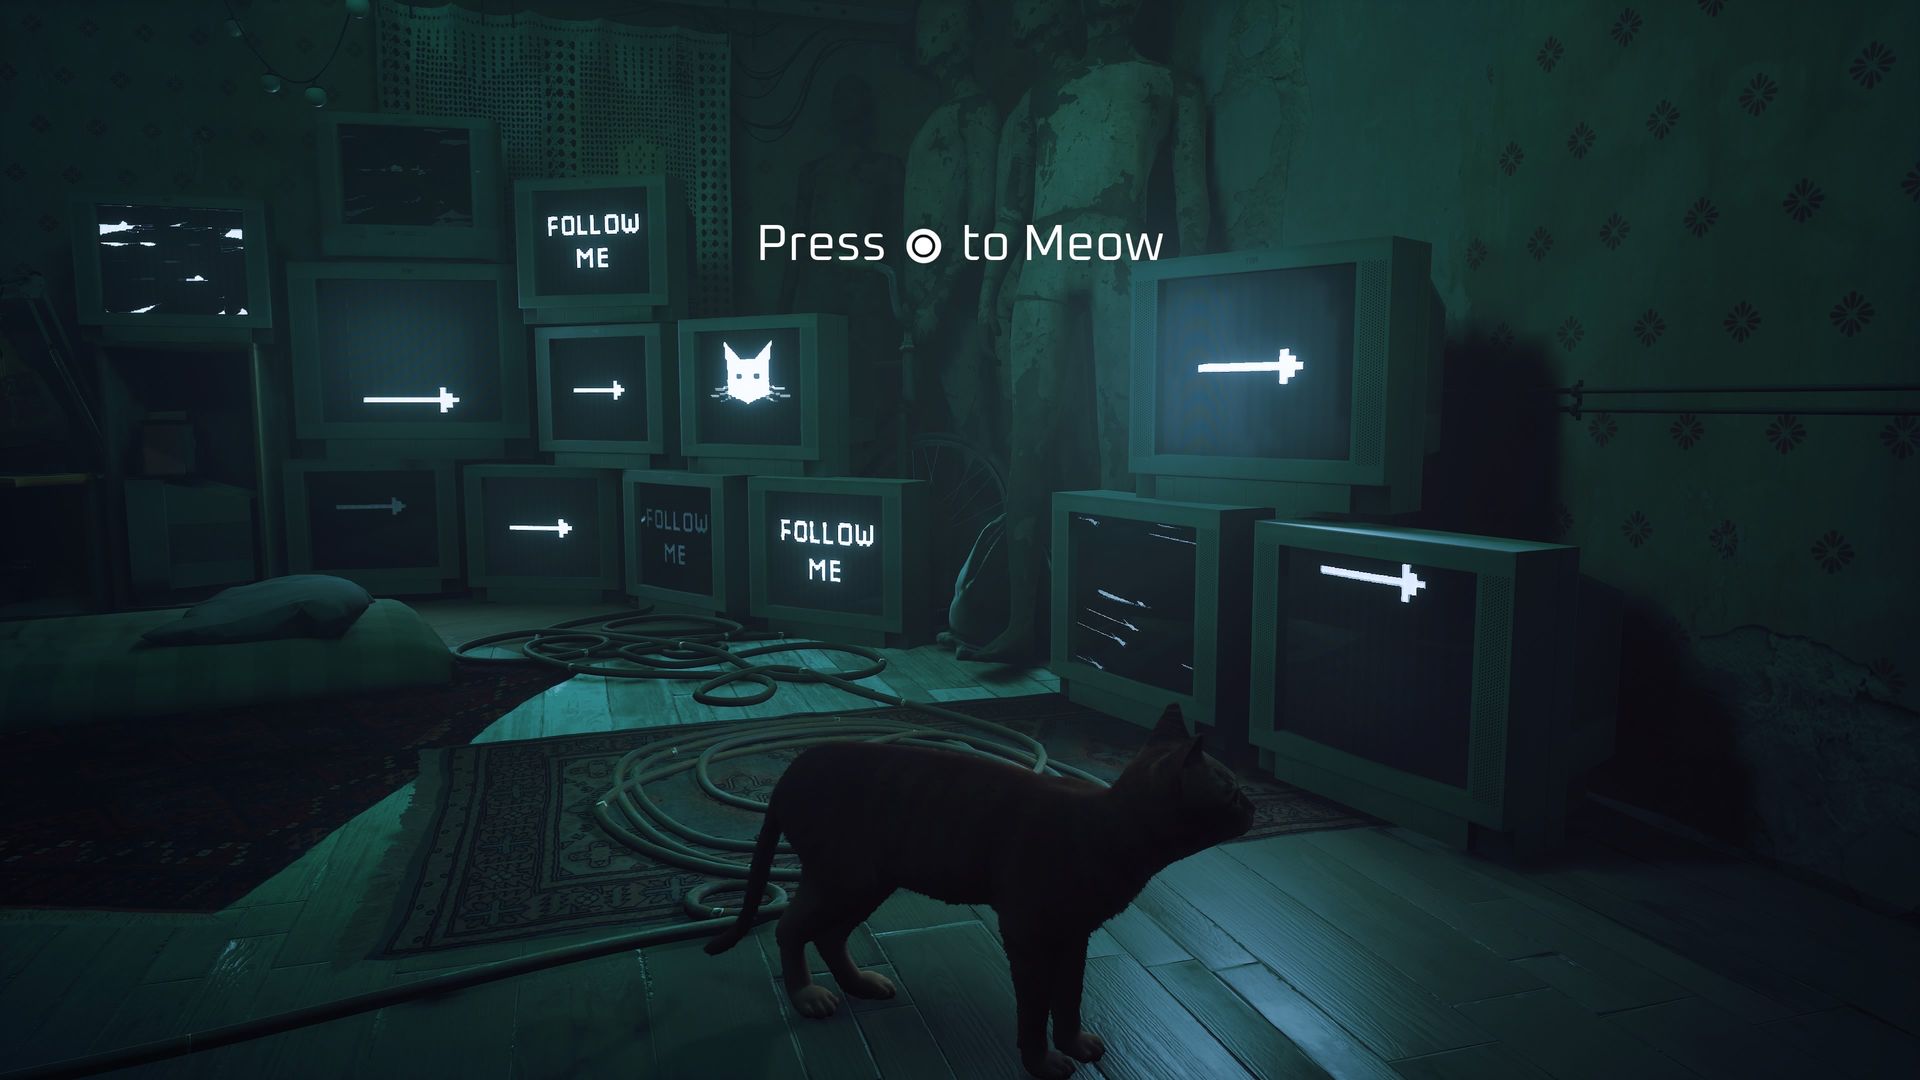 Video game screenshot of a cat in a room filled with TVs. A prompt on screen states "Press circle button to meow"